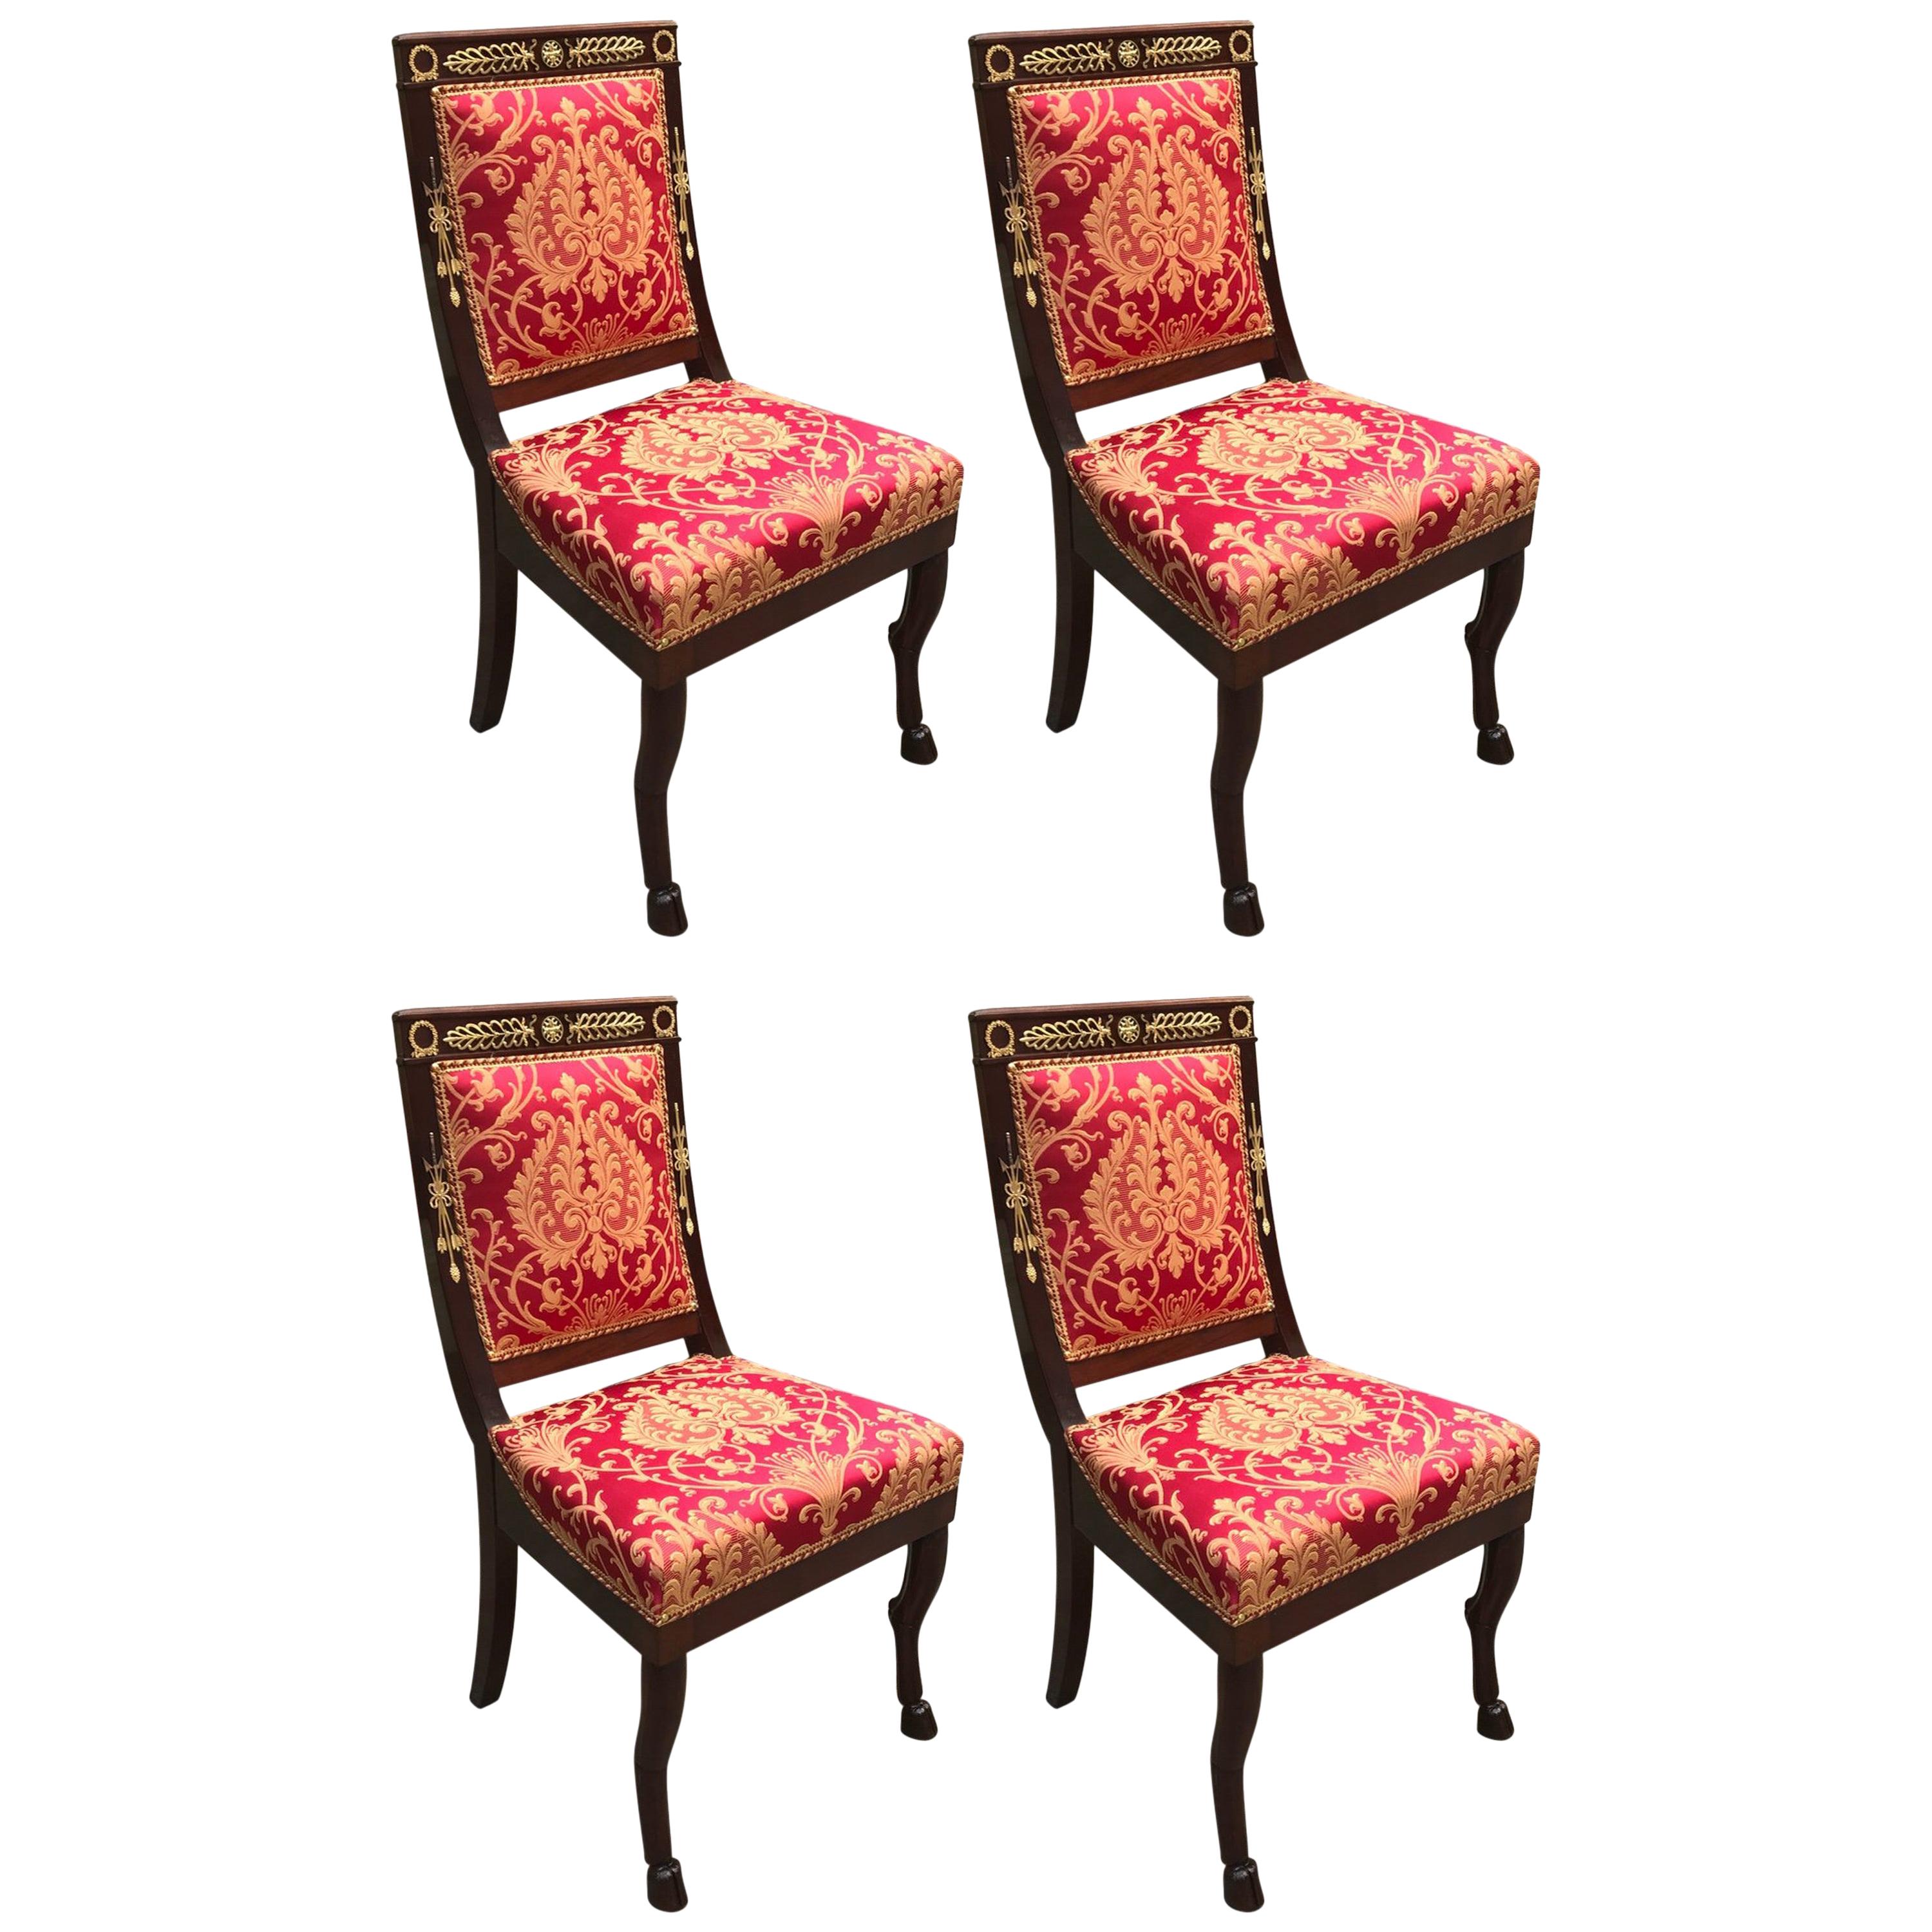 Four Italian Dining Chairs Empire Style Red Gold Upholstery 20th Century For Sale